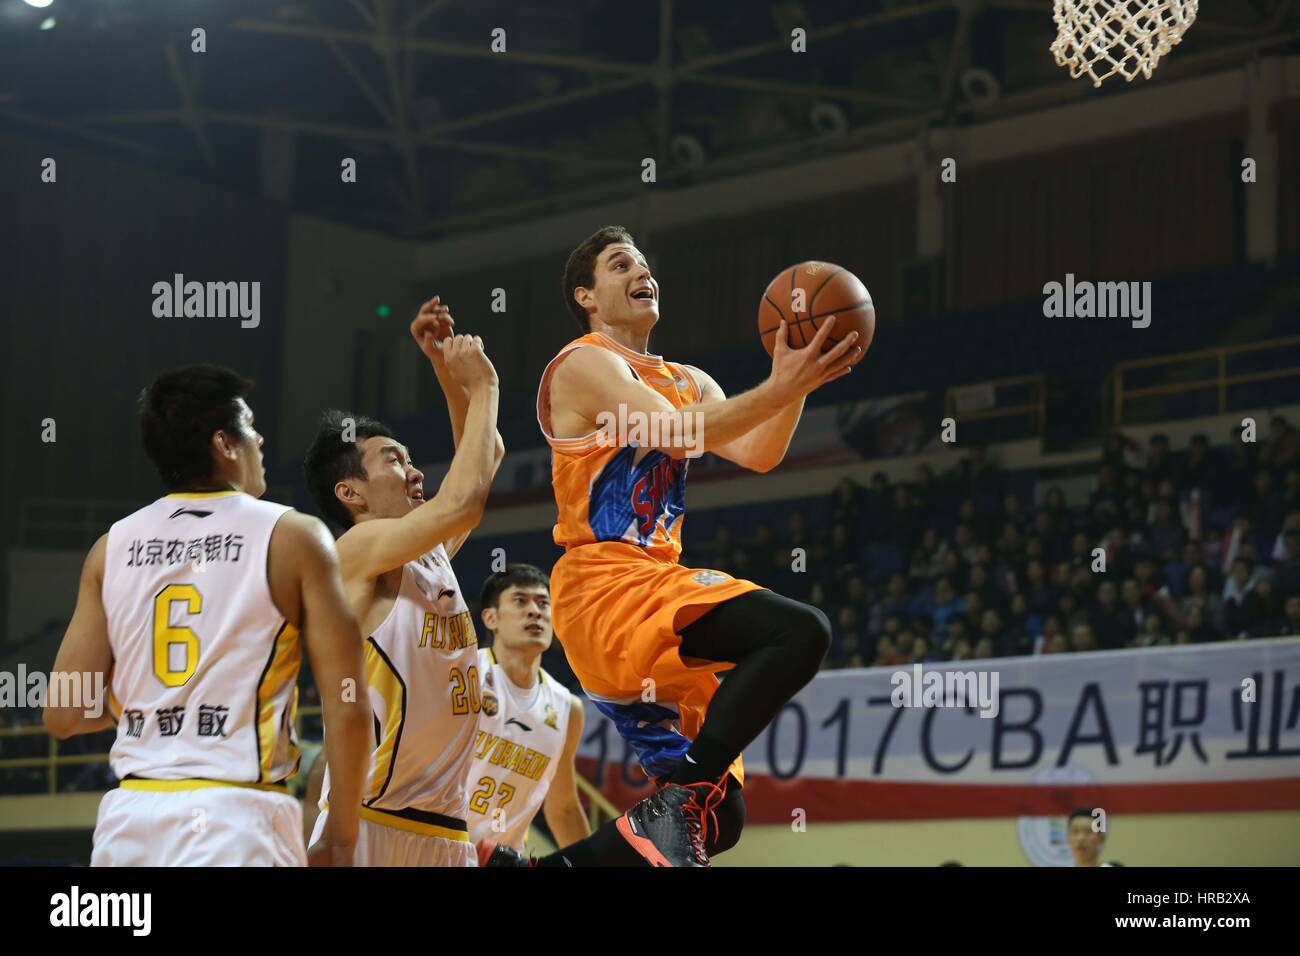 Former BYU star Jimmer Fredette scores career-high 75 points in China